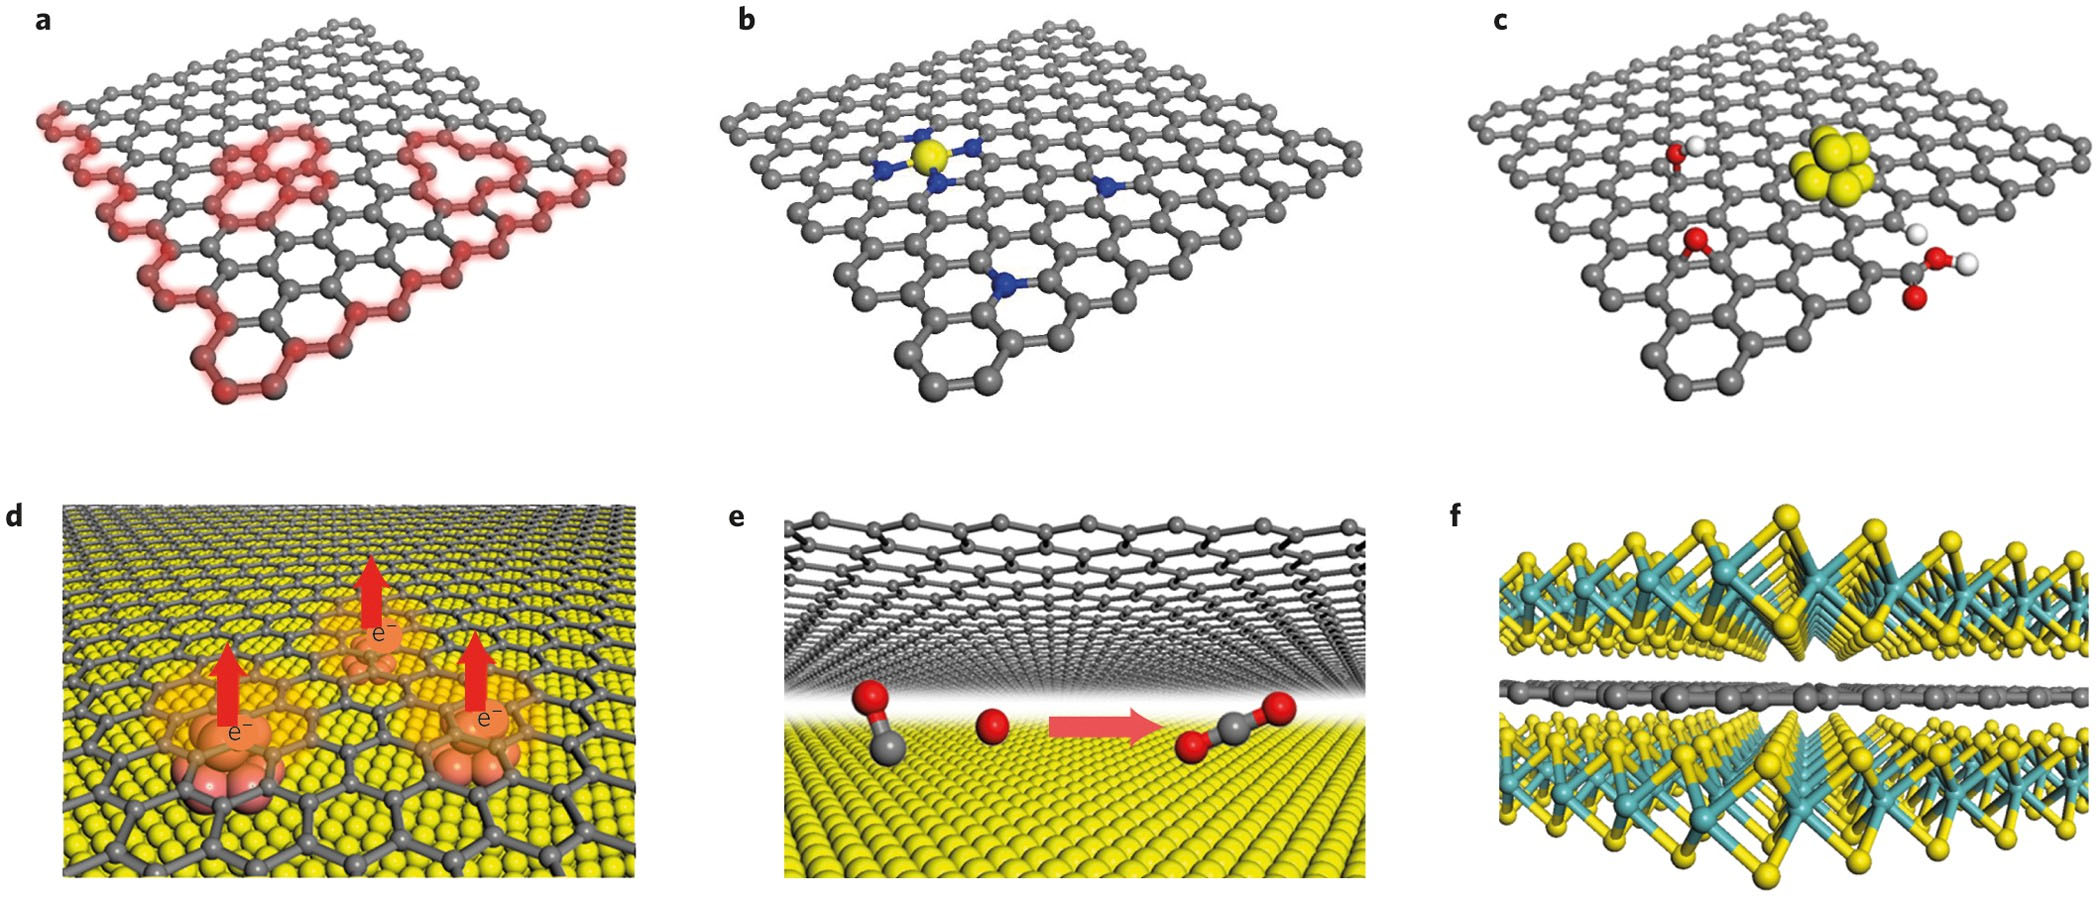 This image illustrates the concept of heterostructure catalysis with various graphene structures